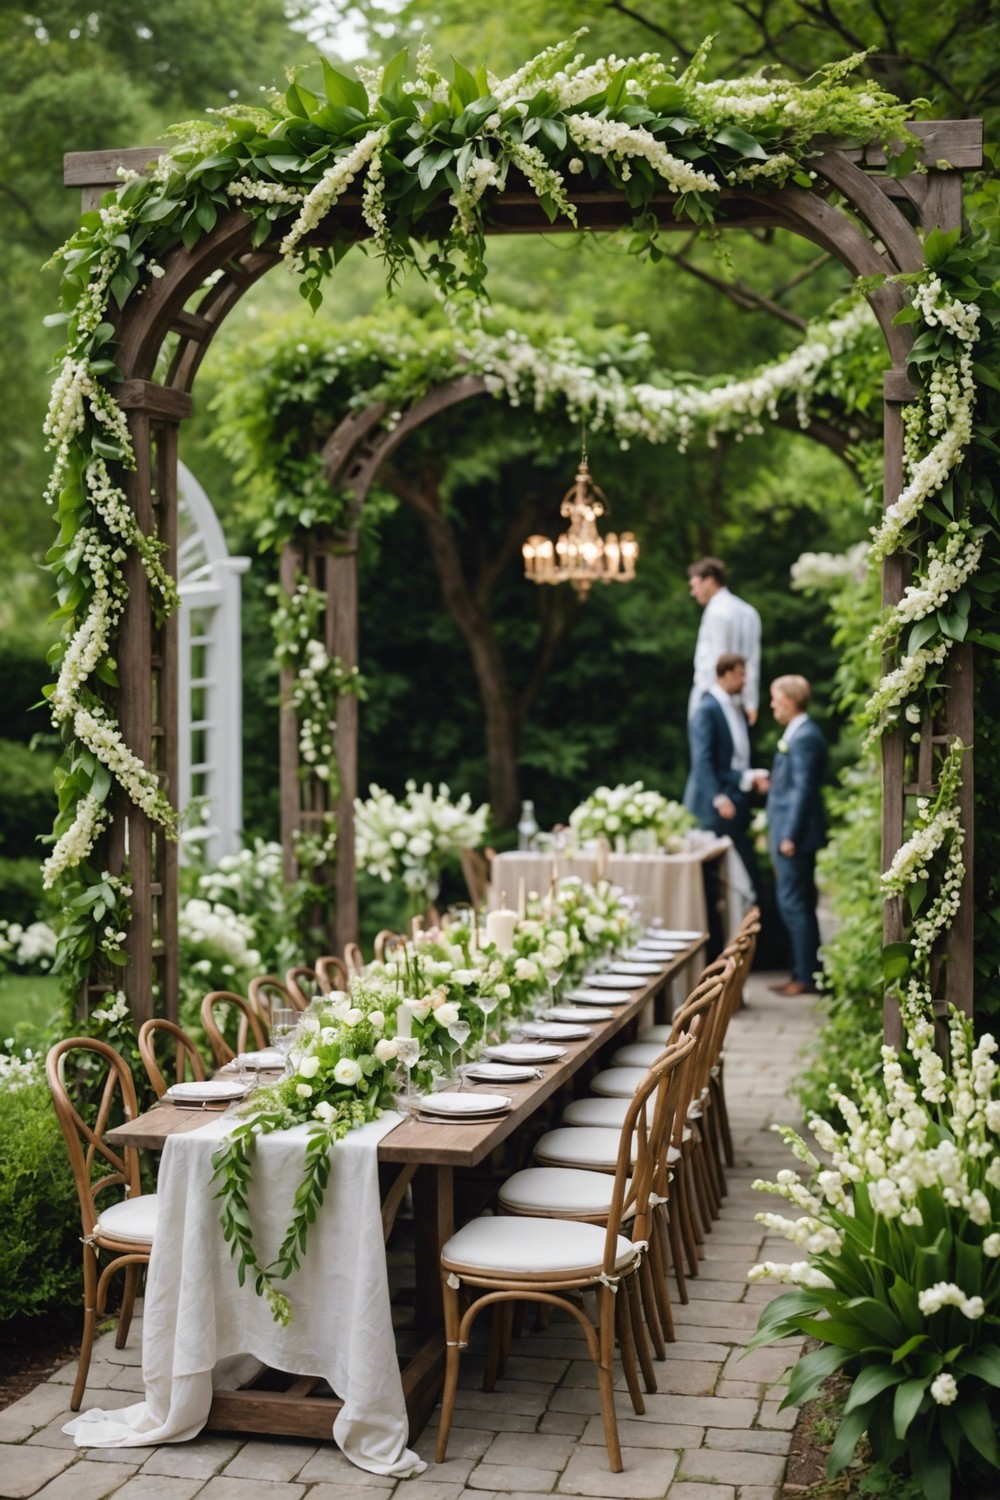 Create a Lily of the Valley Garland for Your Garden Party